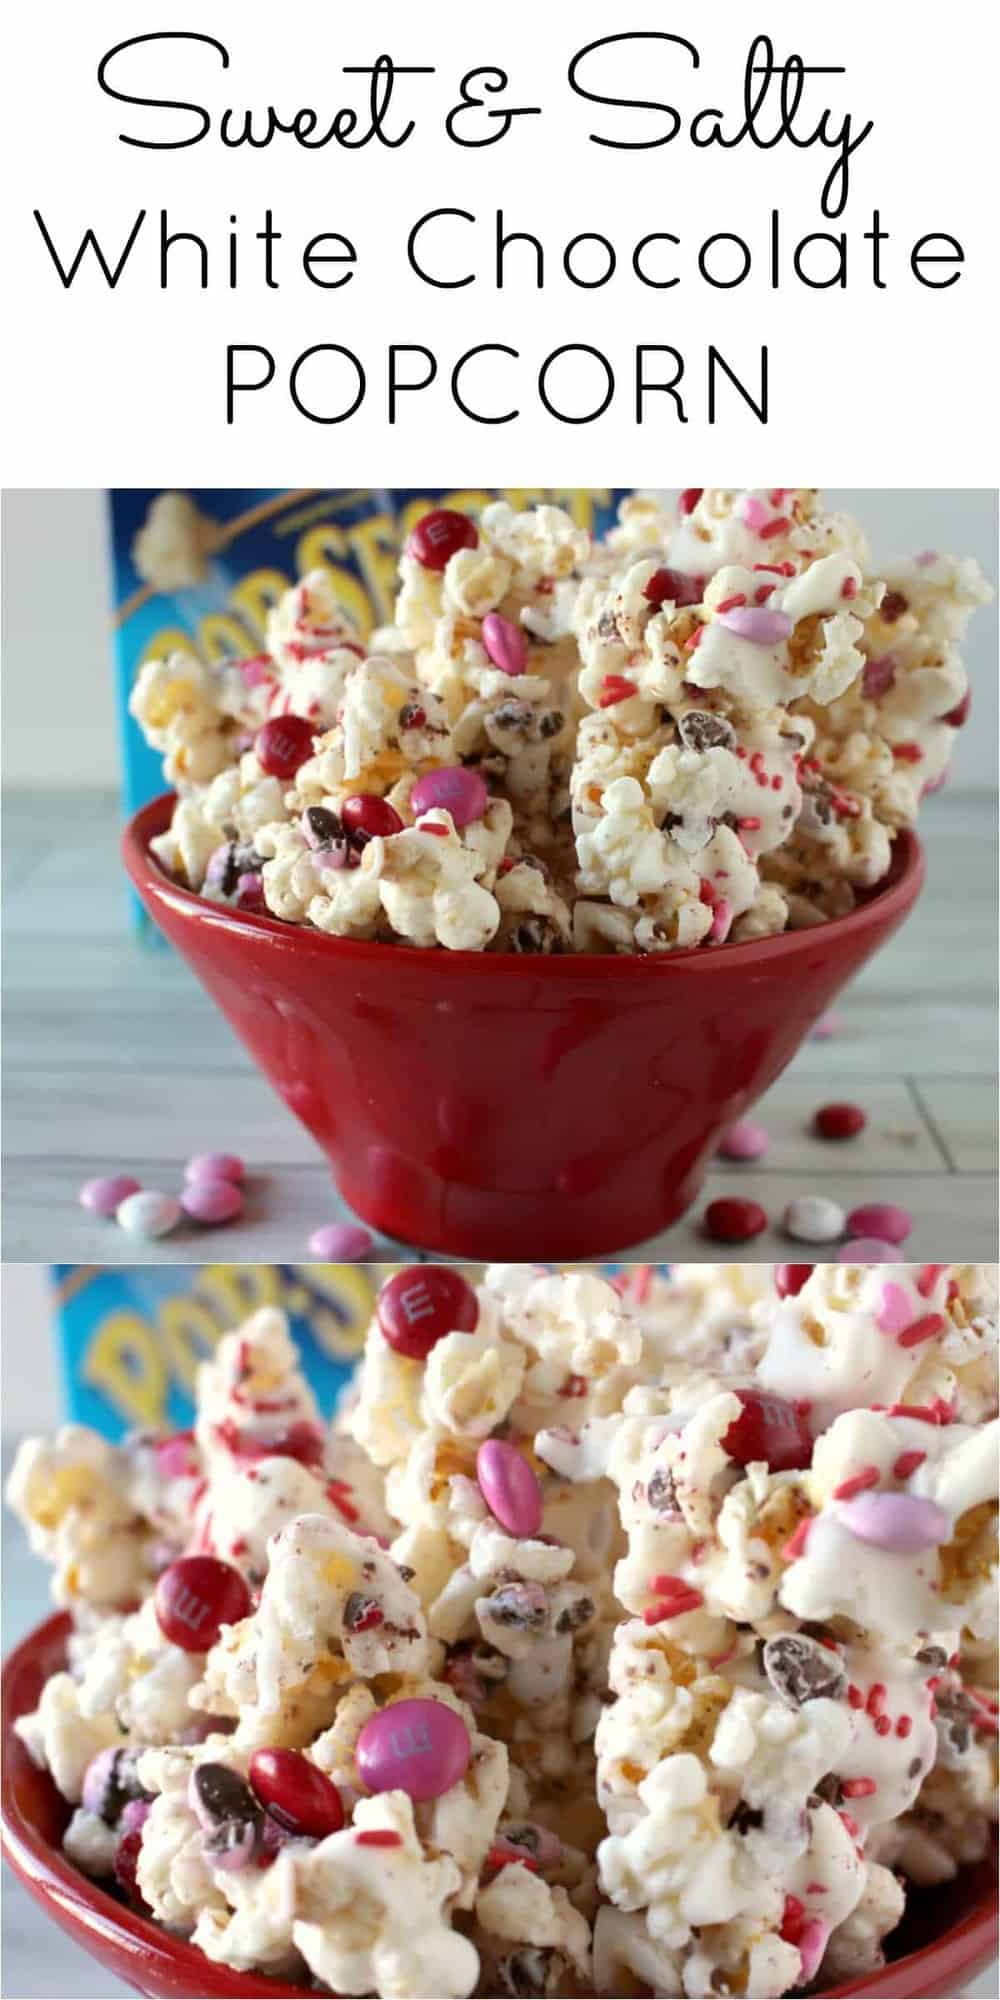 Sweet and Salty White Chocolate Popcorn